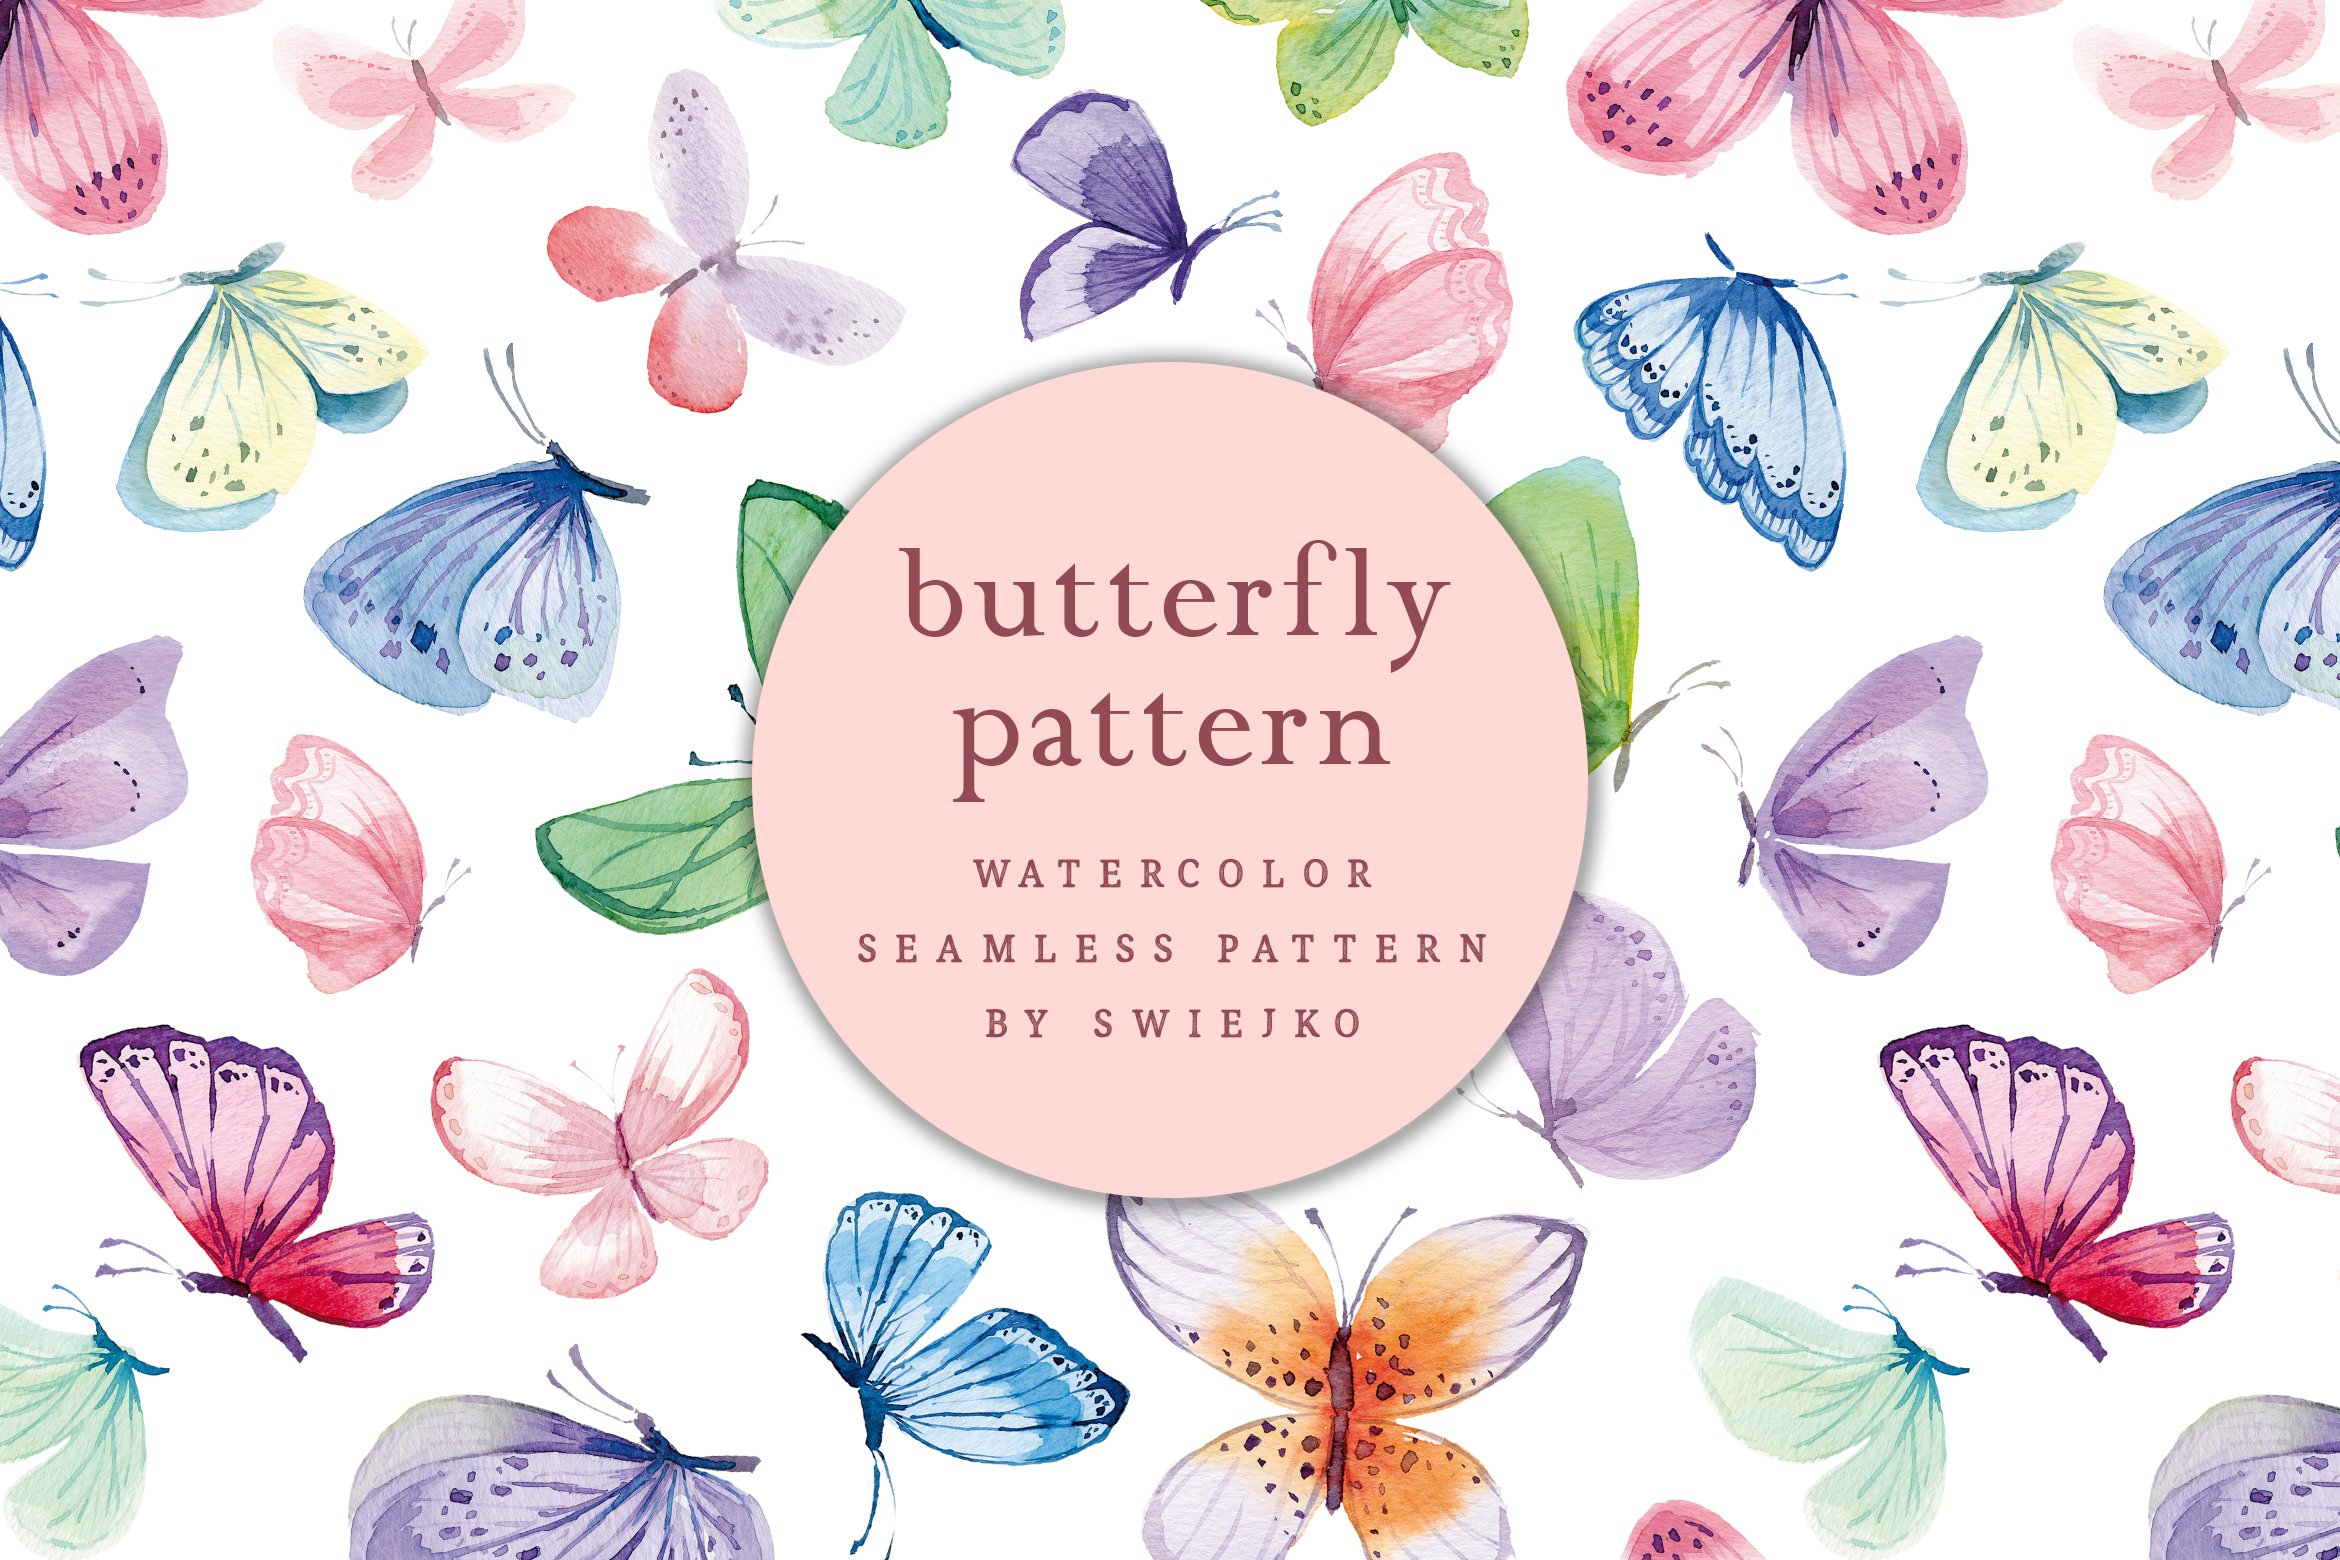 Butterfly Seamless Pattern cover image.